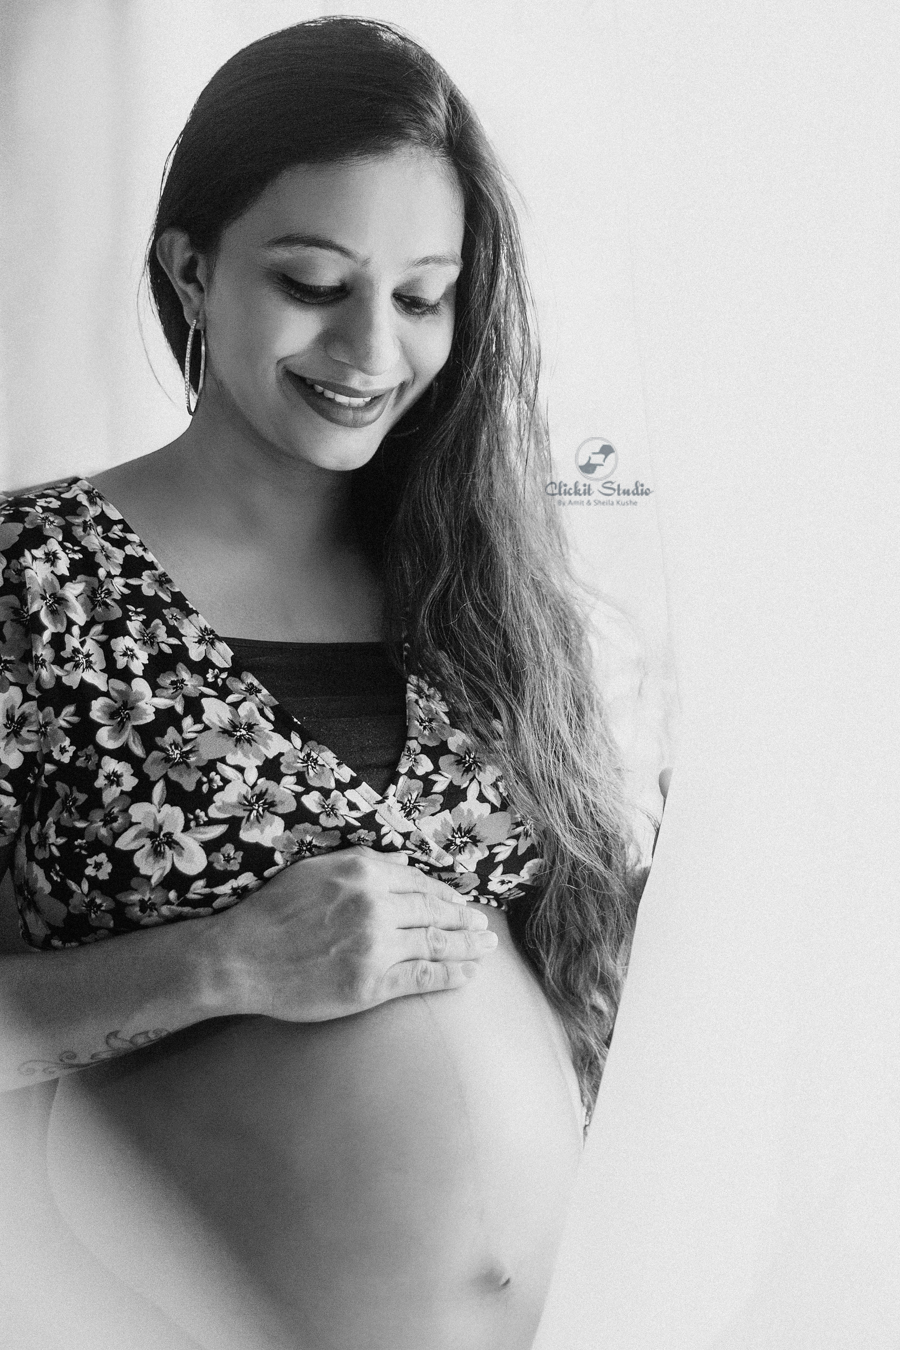 maternity photography, maternity photographer, maternity shoot, maternity session, maternity, maternity photographer in mumbai, pregnancy photography, maternity photos, pregnancy photo, maternity fashion, maternity photo locations in mumbai, newborn photography, pregnancy style, family photography, baby bump, baby belly, mommy to be, maternity style, newborn photographer, mom to be mumbai, babyphotography, preggo, pregnancy, lifestyle photography, pregnant